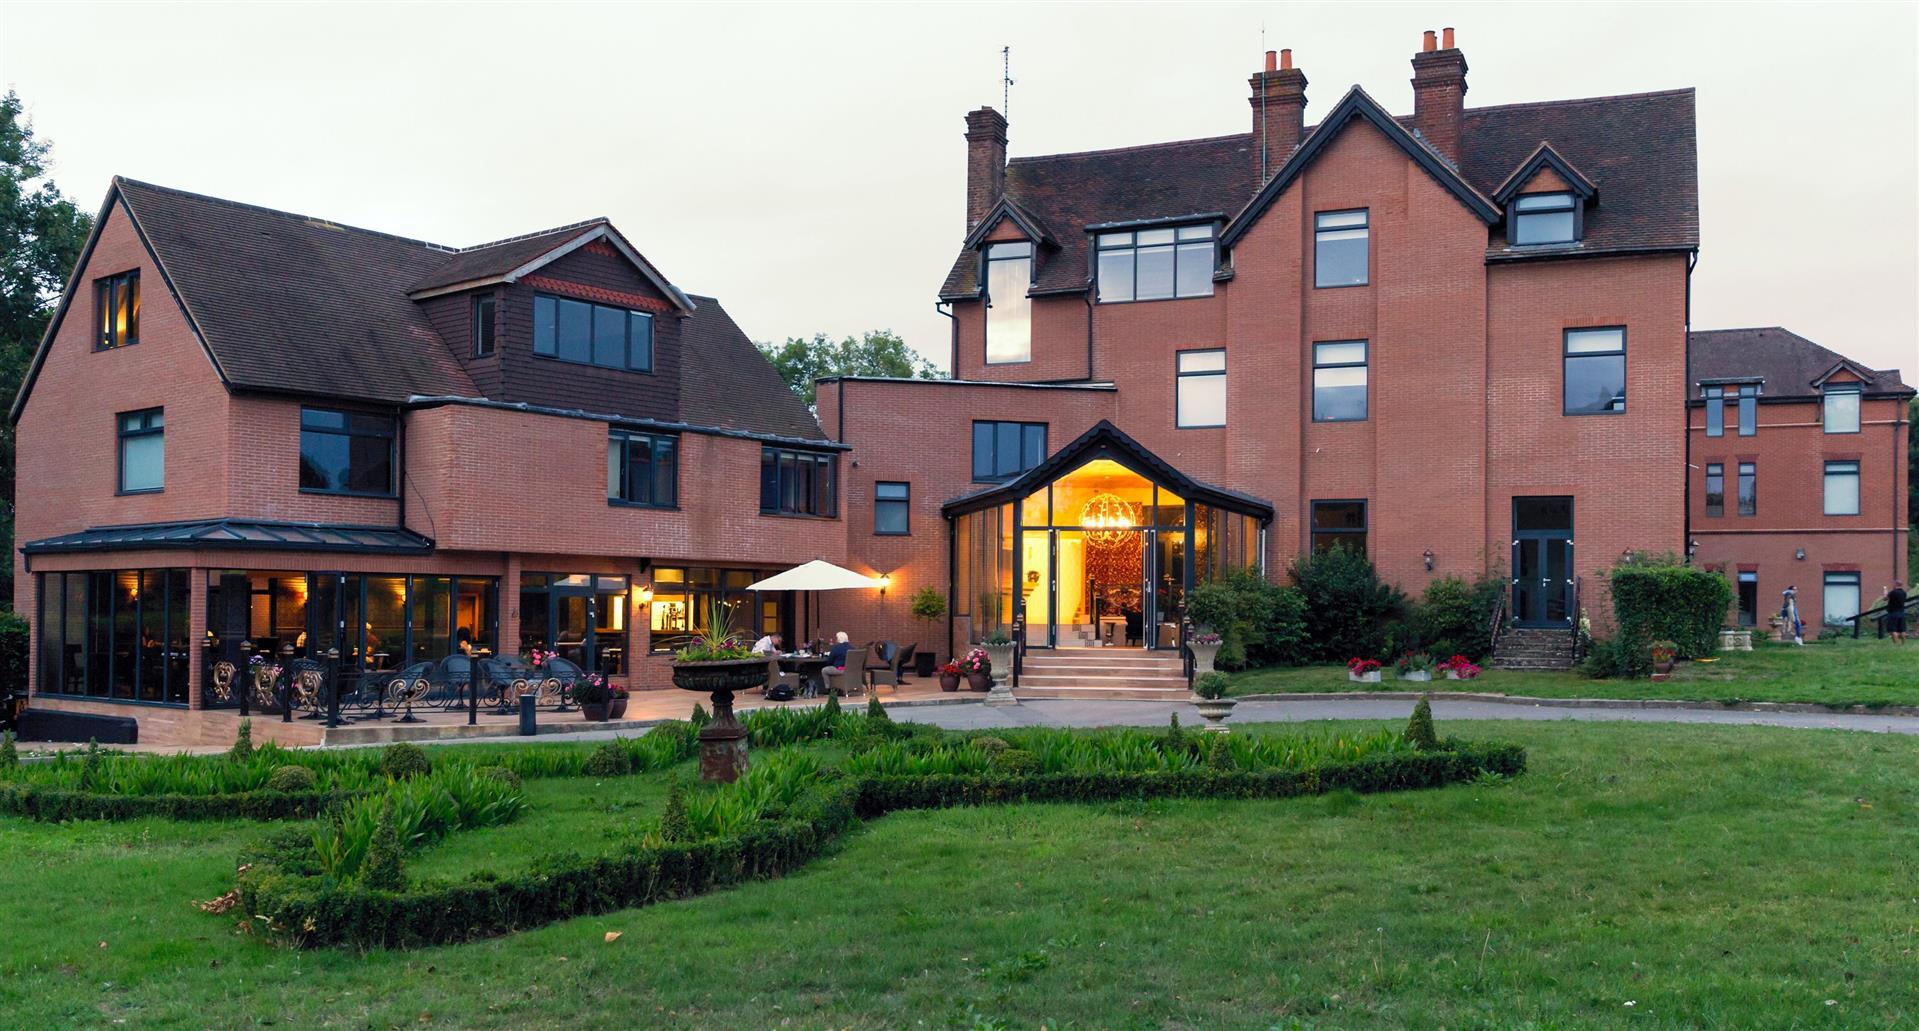 Guildford Manor Hotel & Spa in Guildford, GB1